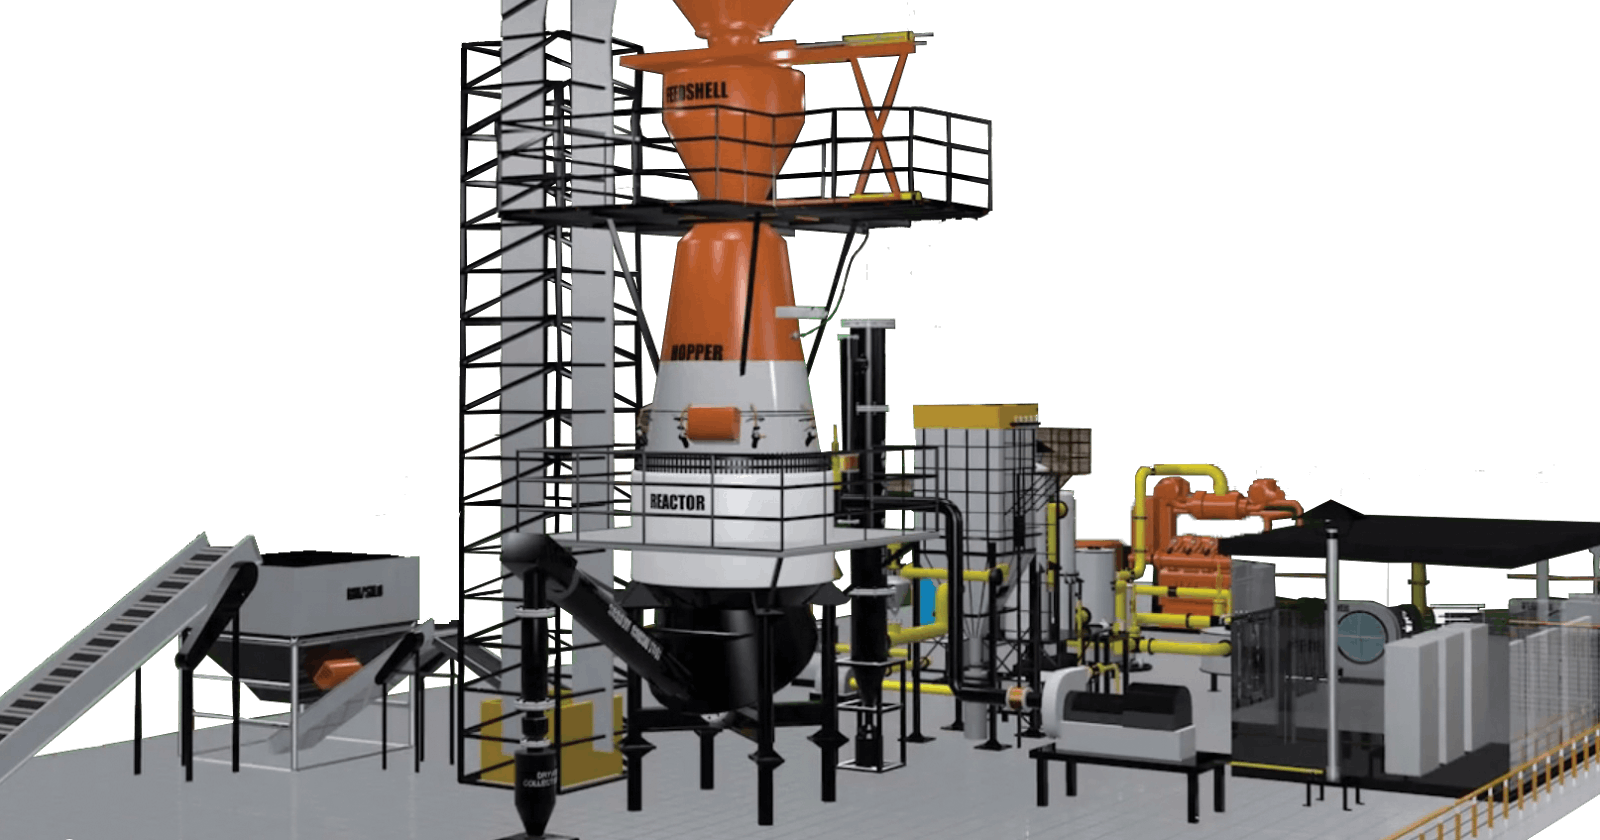 Europe Biomass Gasification Market 2027: Overview, Analysis, Growth, Scope and Key Players